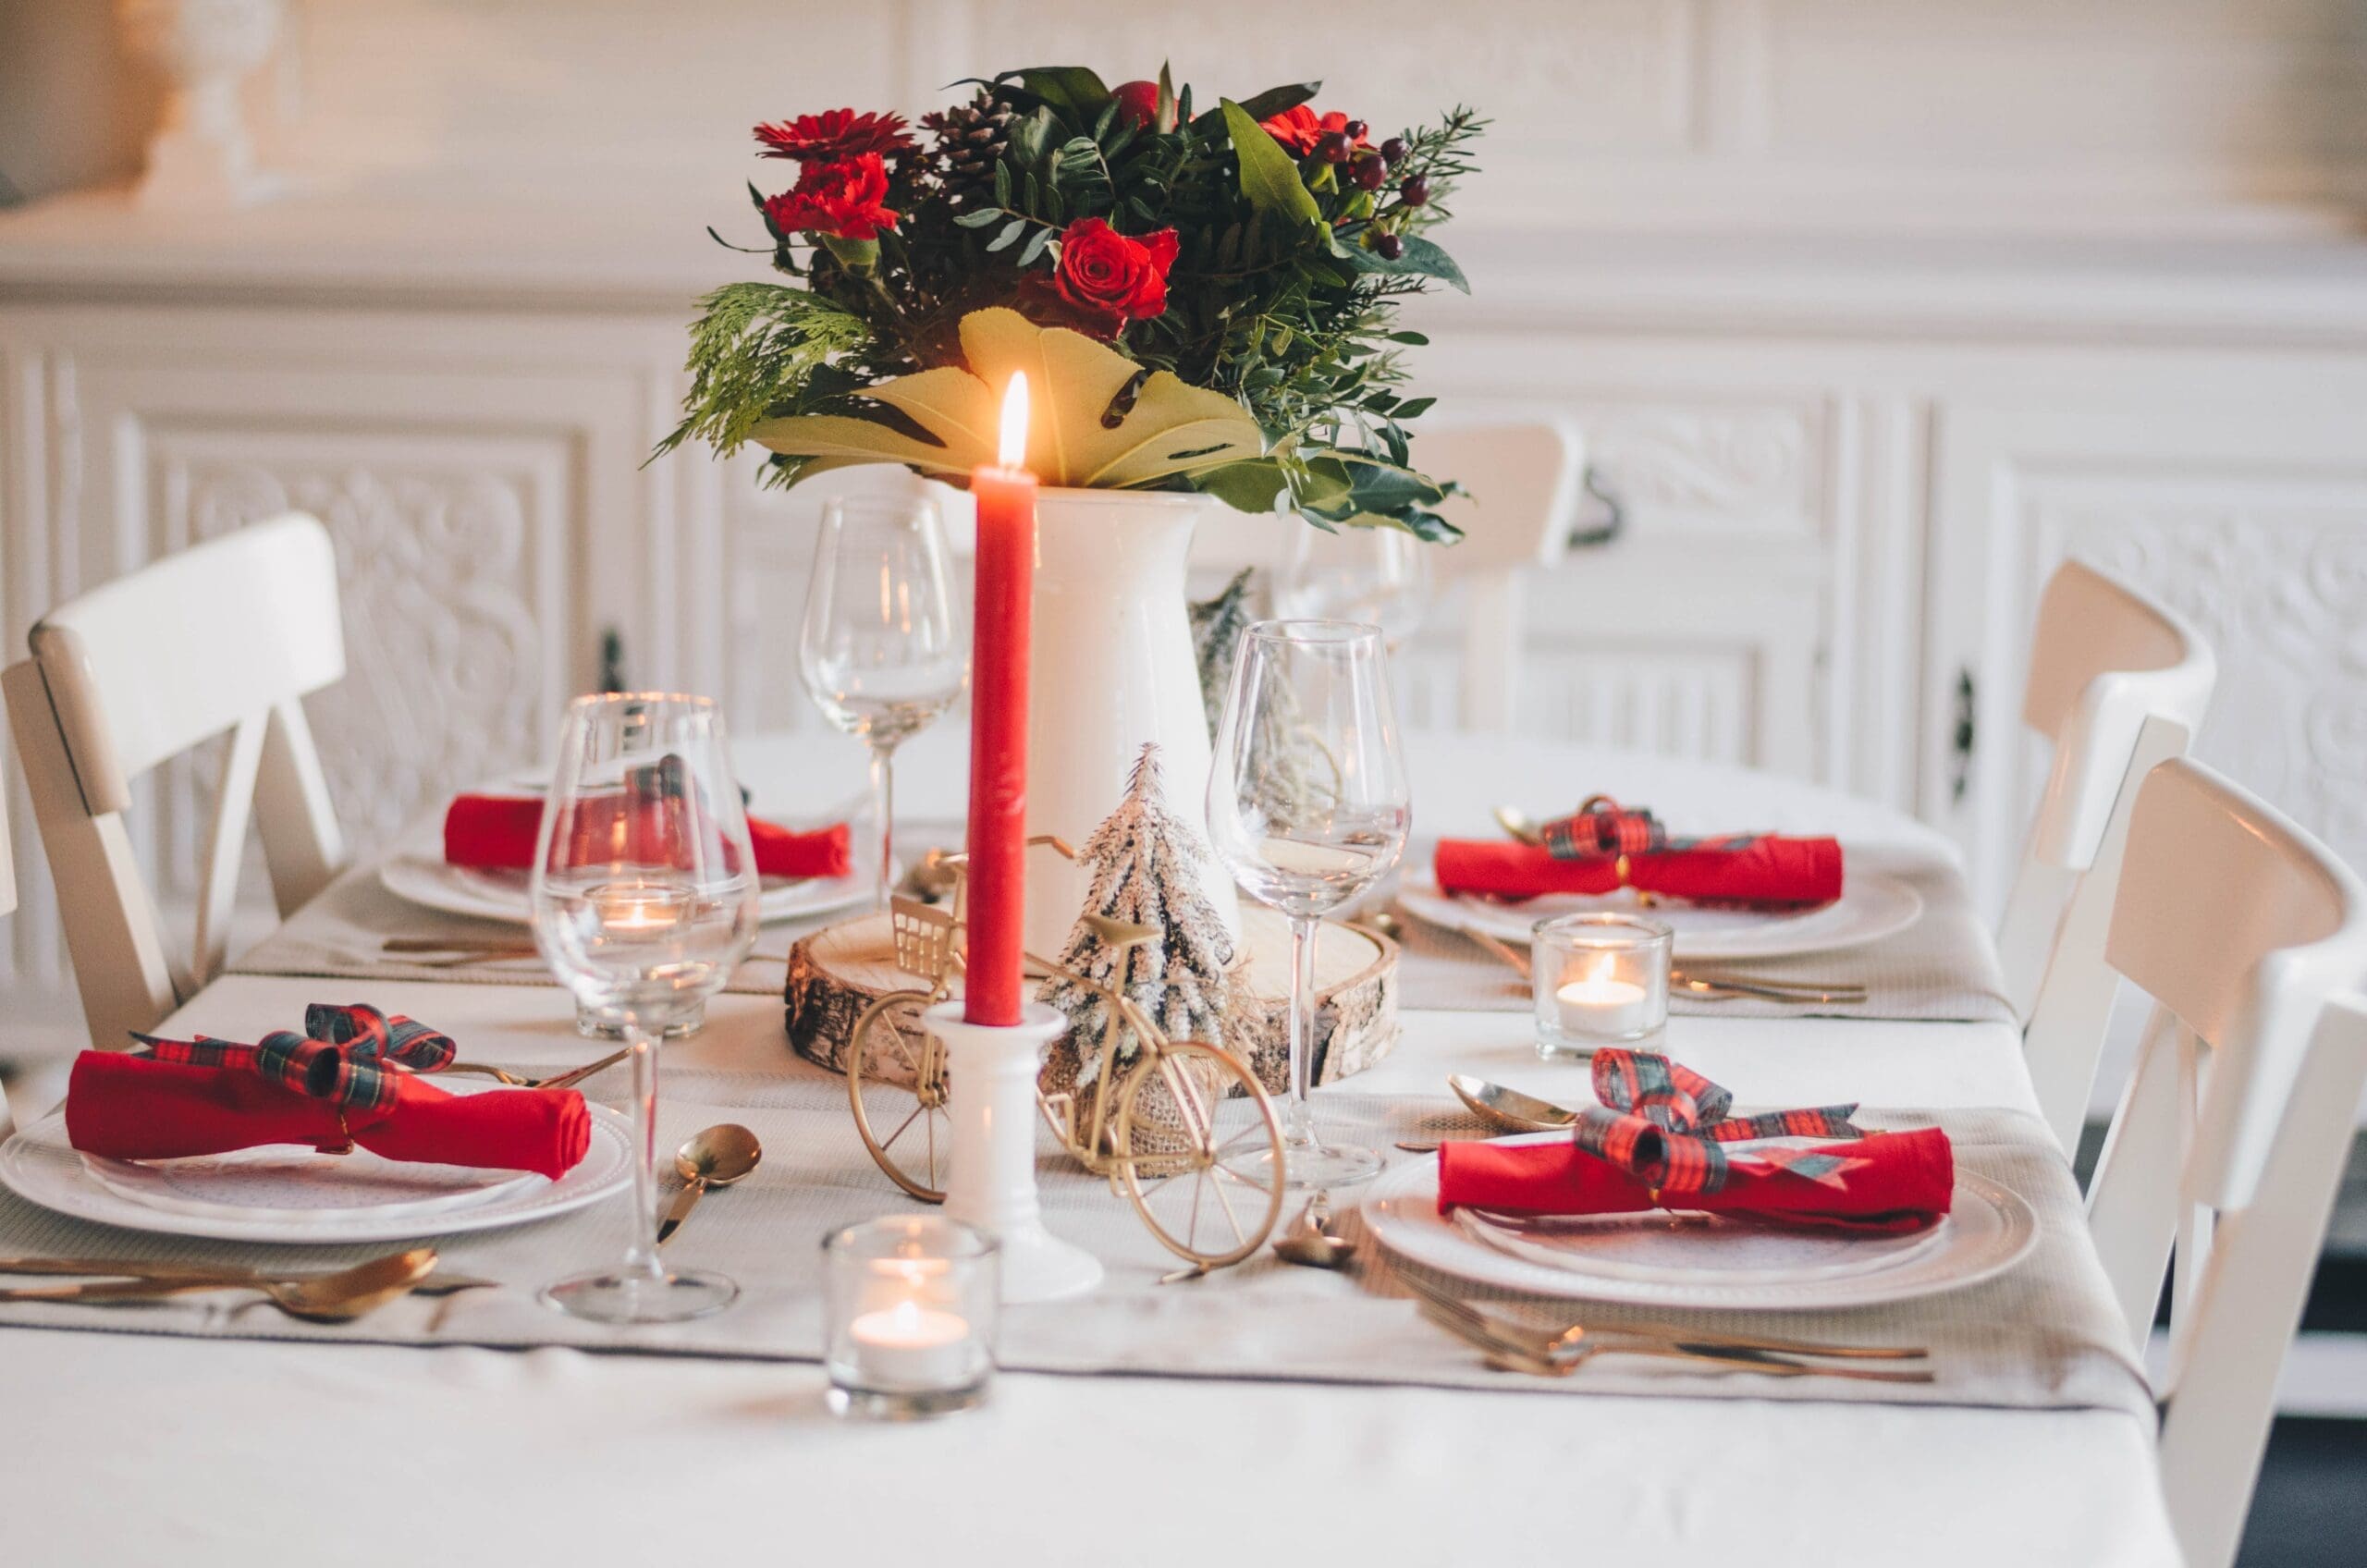 Red and white Christmas themed dinner set-up with flowers